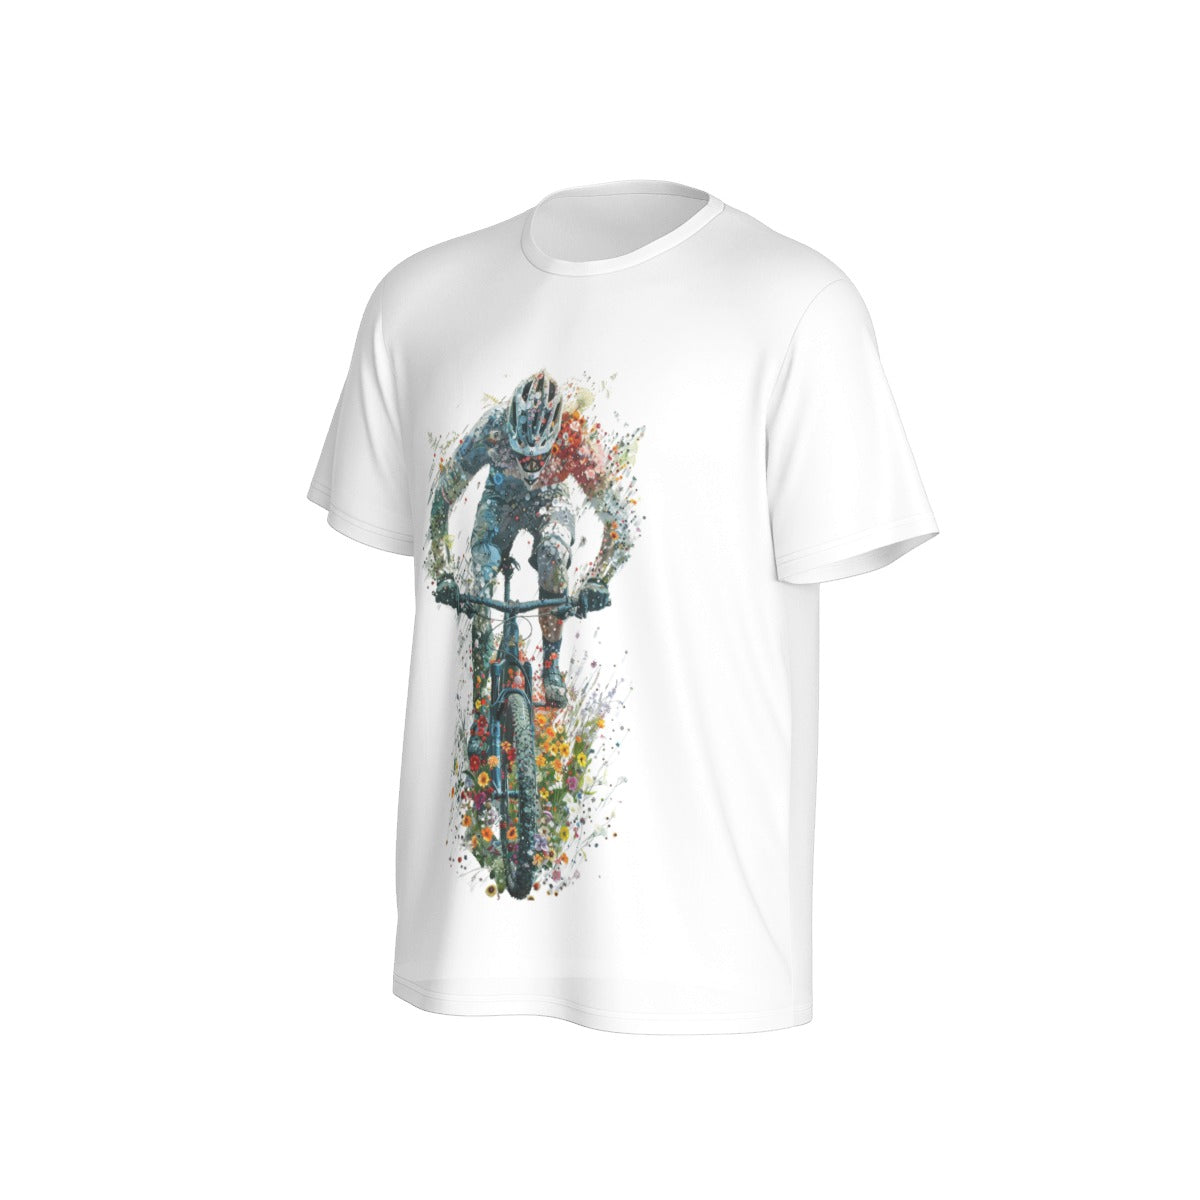 All-Over Print Men's O-Neck Sports T-Shirt